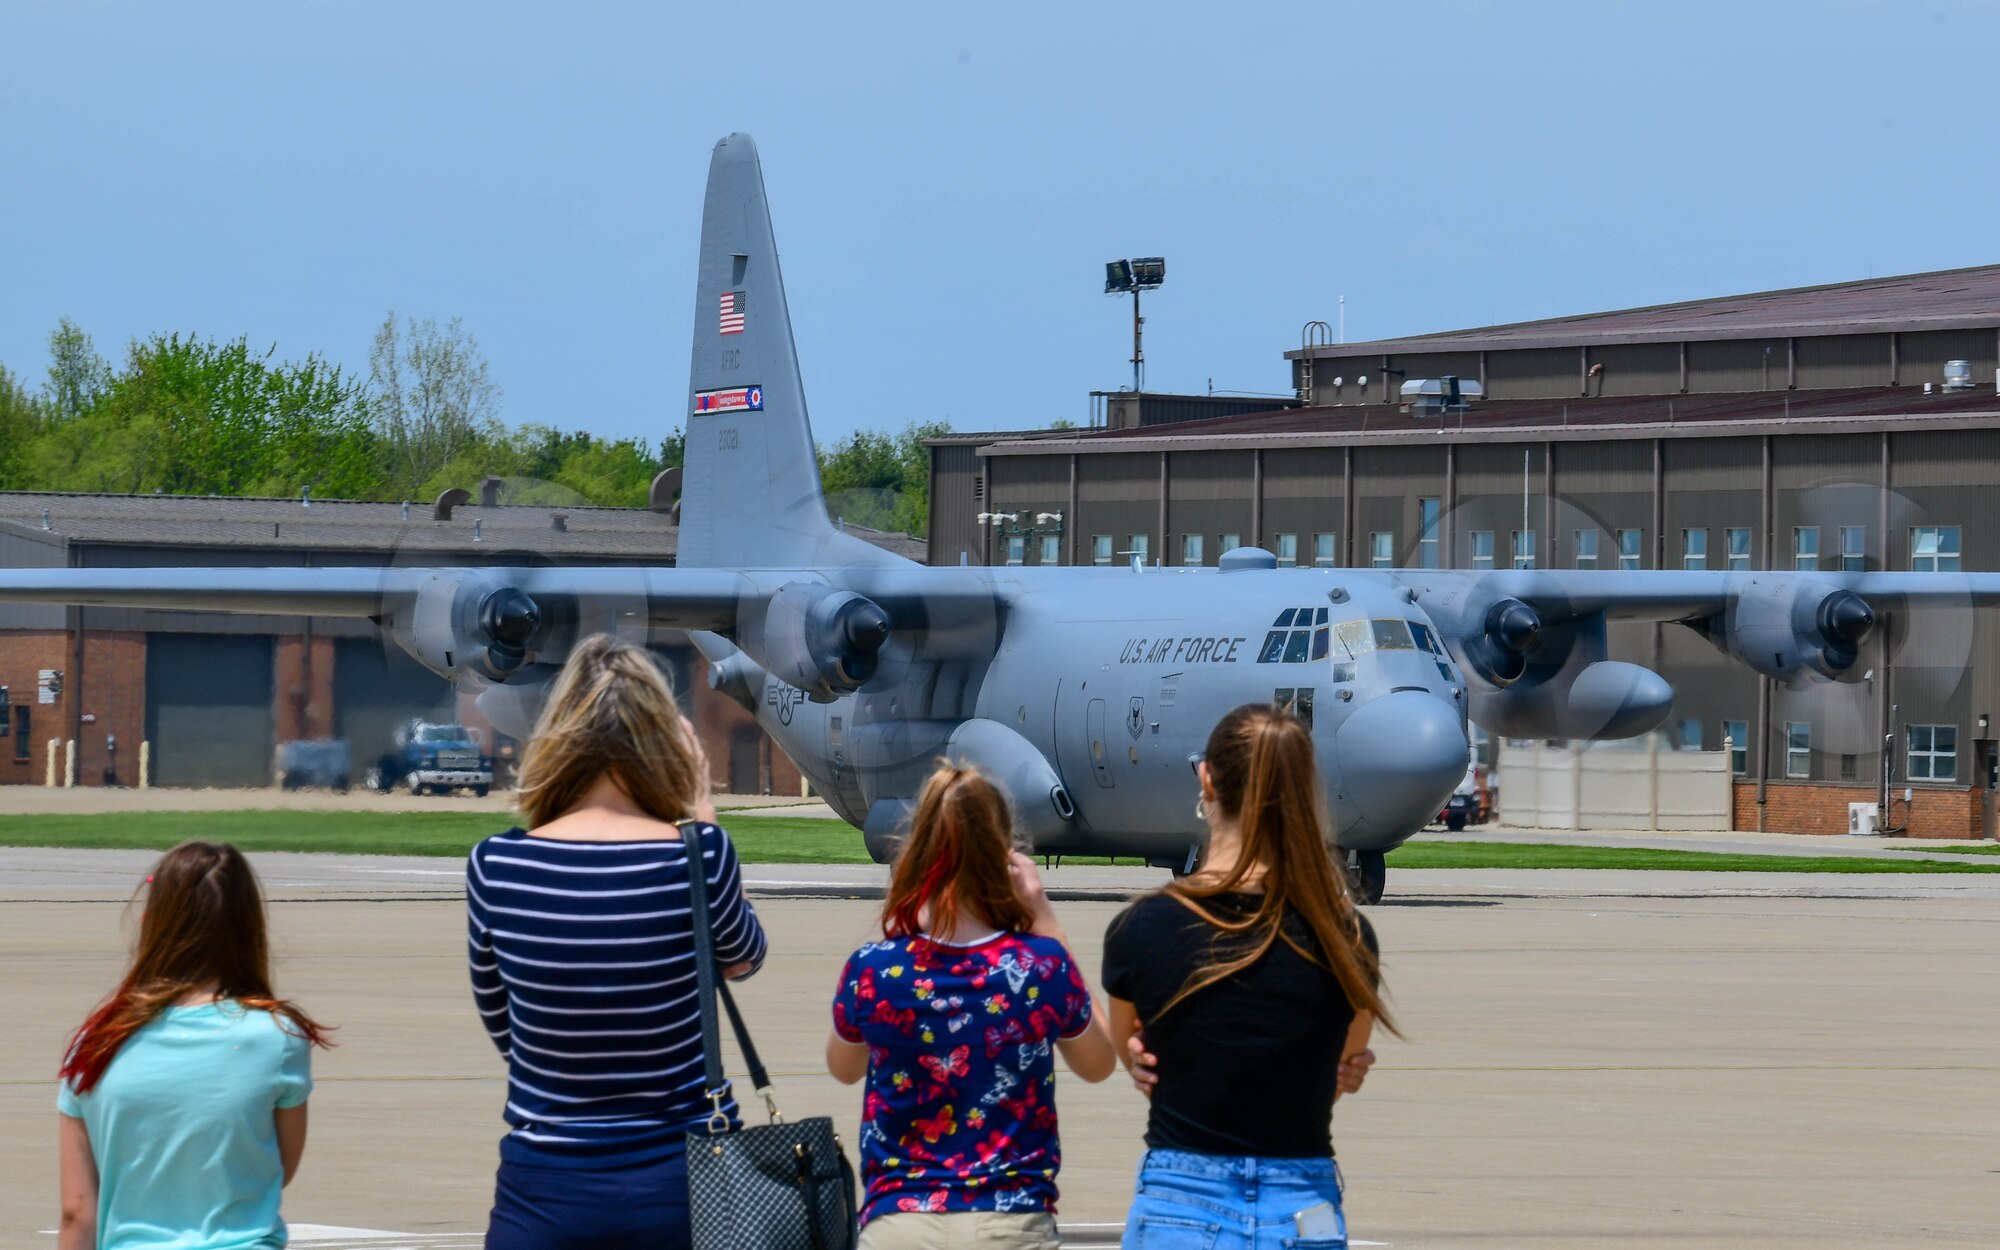 Col. John Boccieri took his final flight with the unit before transitioning to the 911th Airlift Wing at Pittsburgh Air Reserve Station.